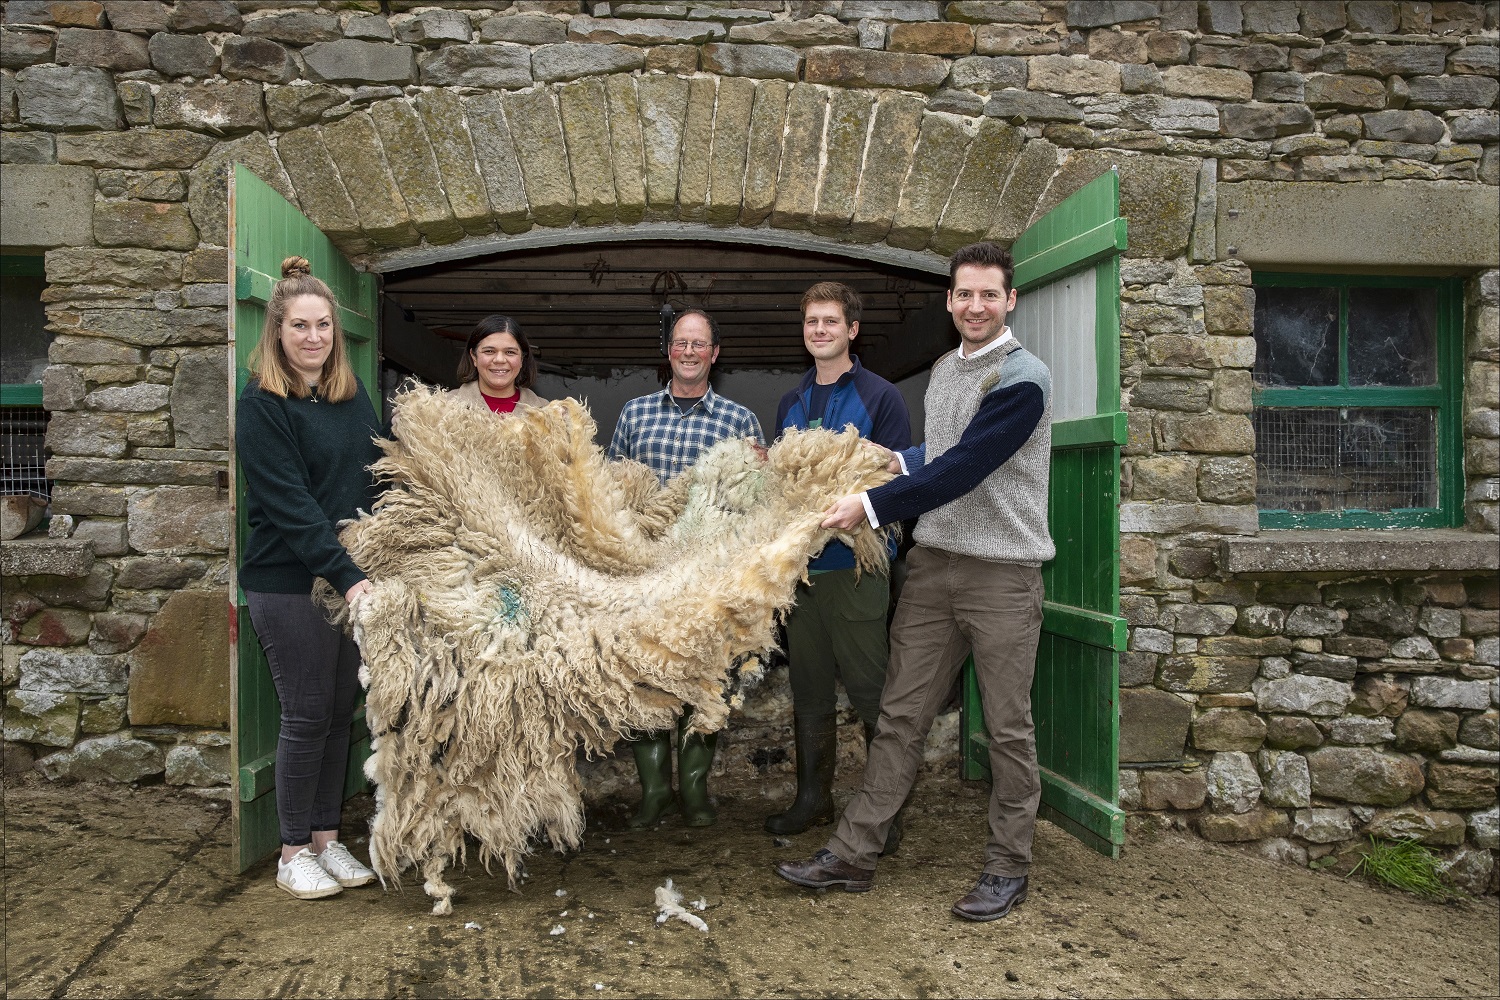 Farm to Yarn: (left to right) Zoe Fletcher and Maria Benjamin of The Flock, father and son farmers duo John and William Dawson with Edward Sexton, owner of clothing brand Glencroft. © Glencroft